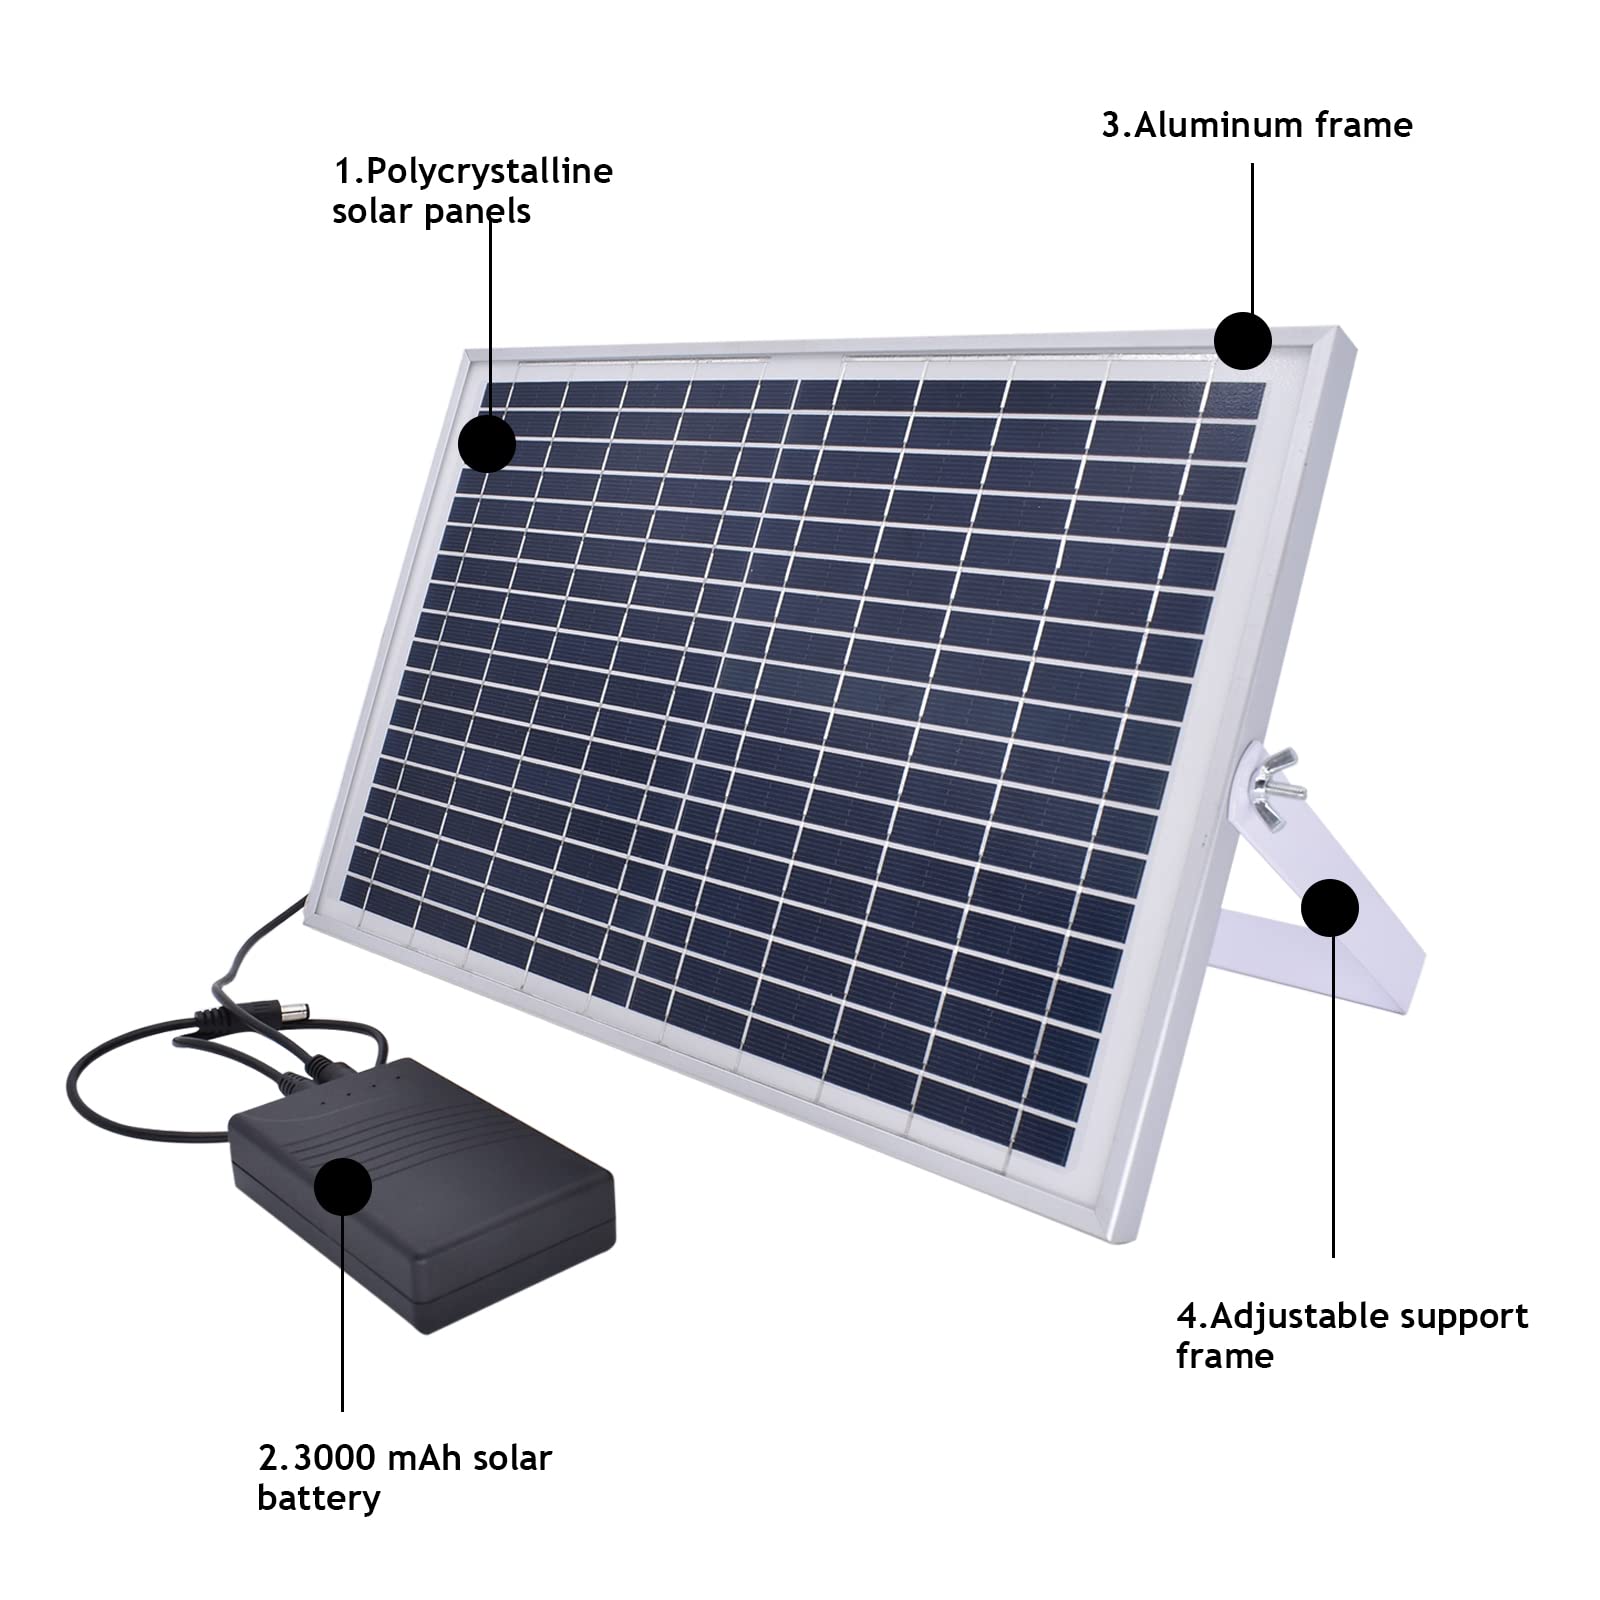 Solar Rechargeable Battery Pack for Automatic Chicken Coop Door, Solar Power Panel with Adjustable Angle Bracket, 3000 mAh 12V Battery, Suitable for Our 12V Voltage Automatic Chicken House Door